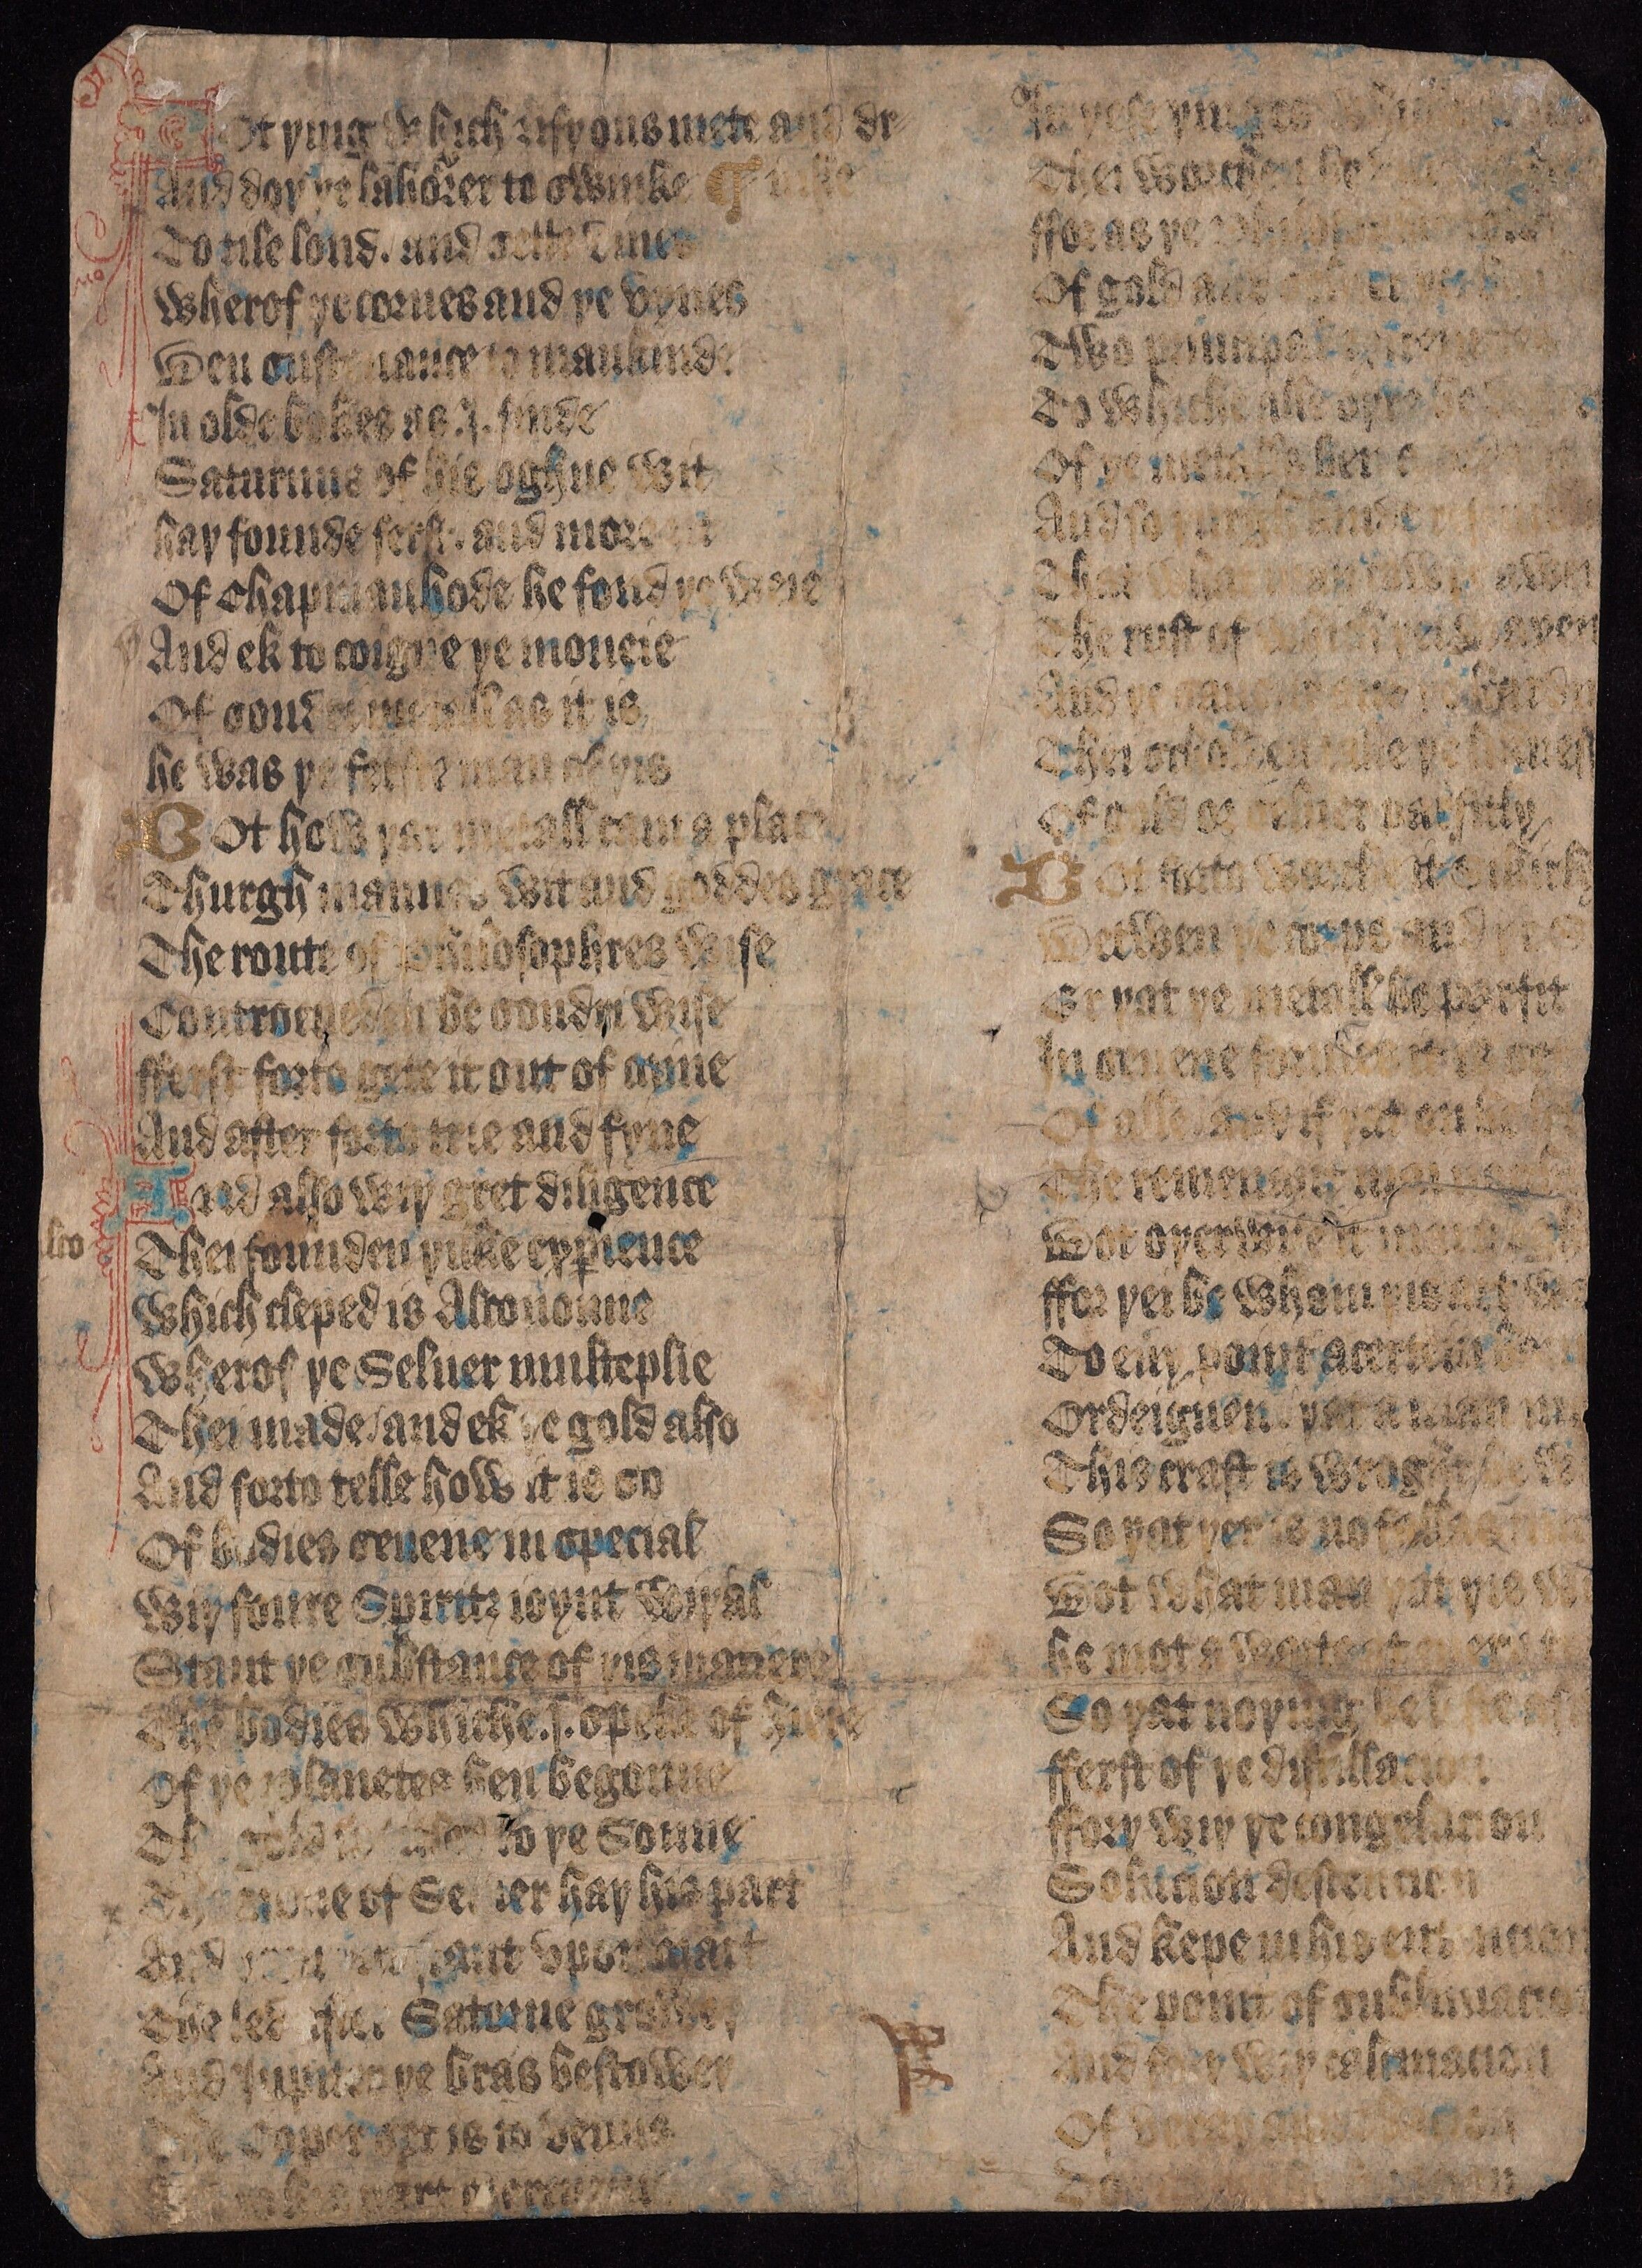 An image of a medieval manuscript page featuring two columns of text in a gothic script.